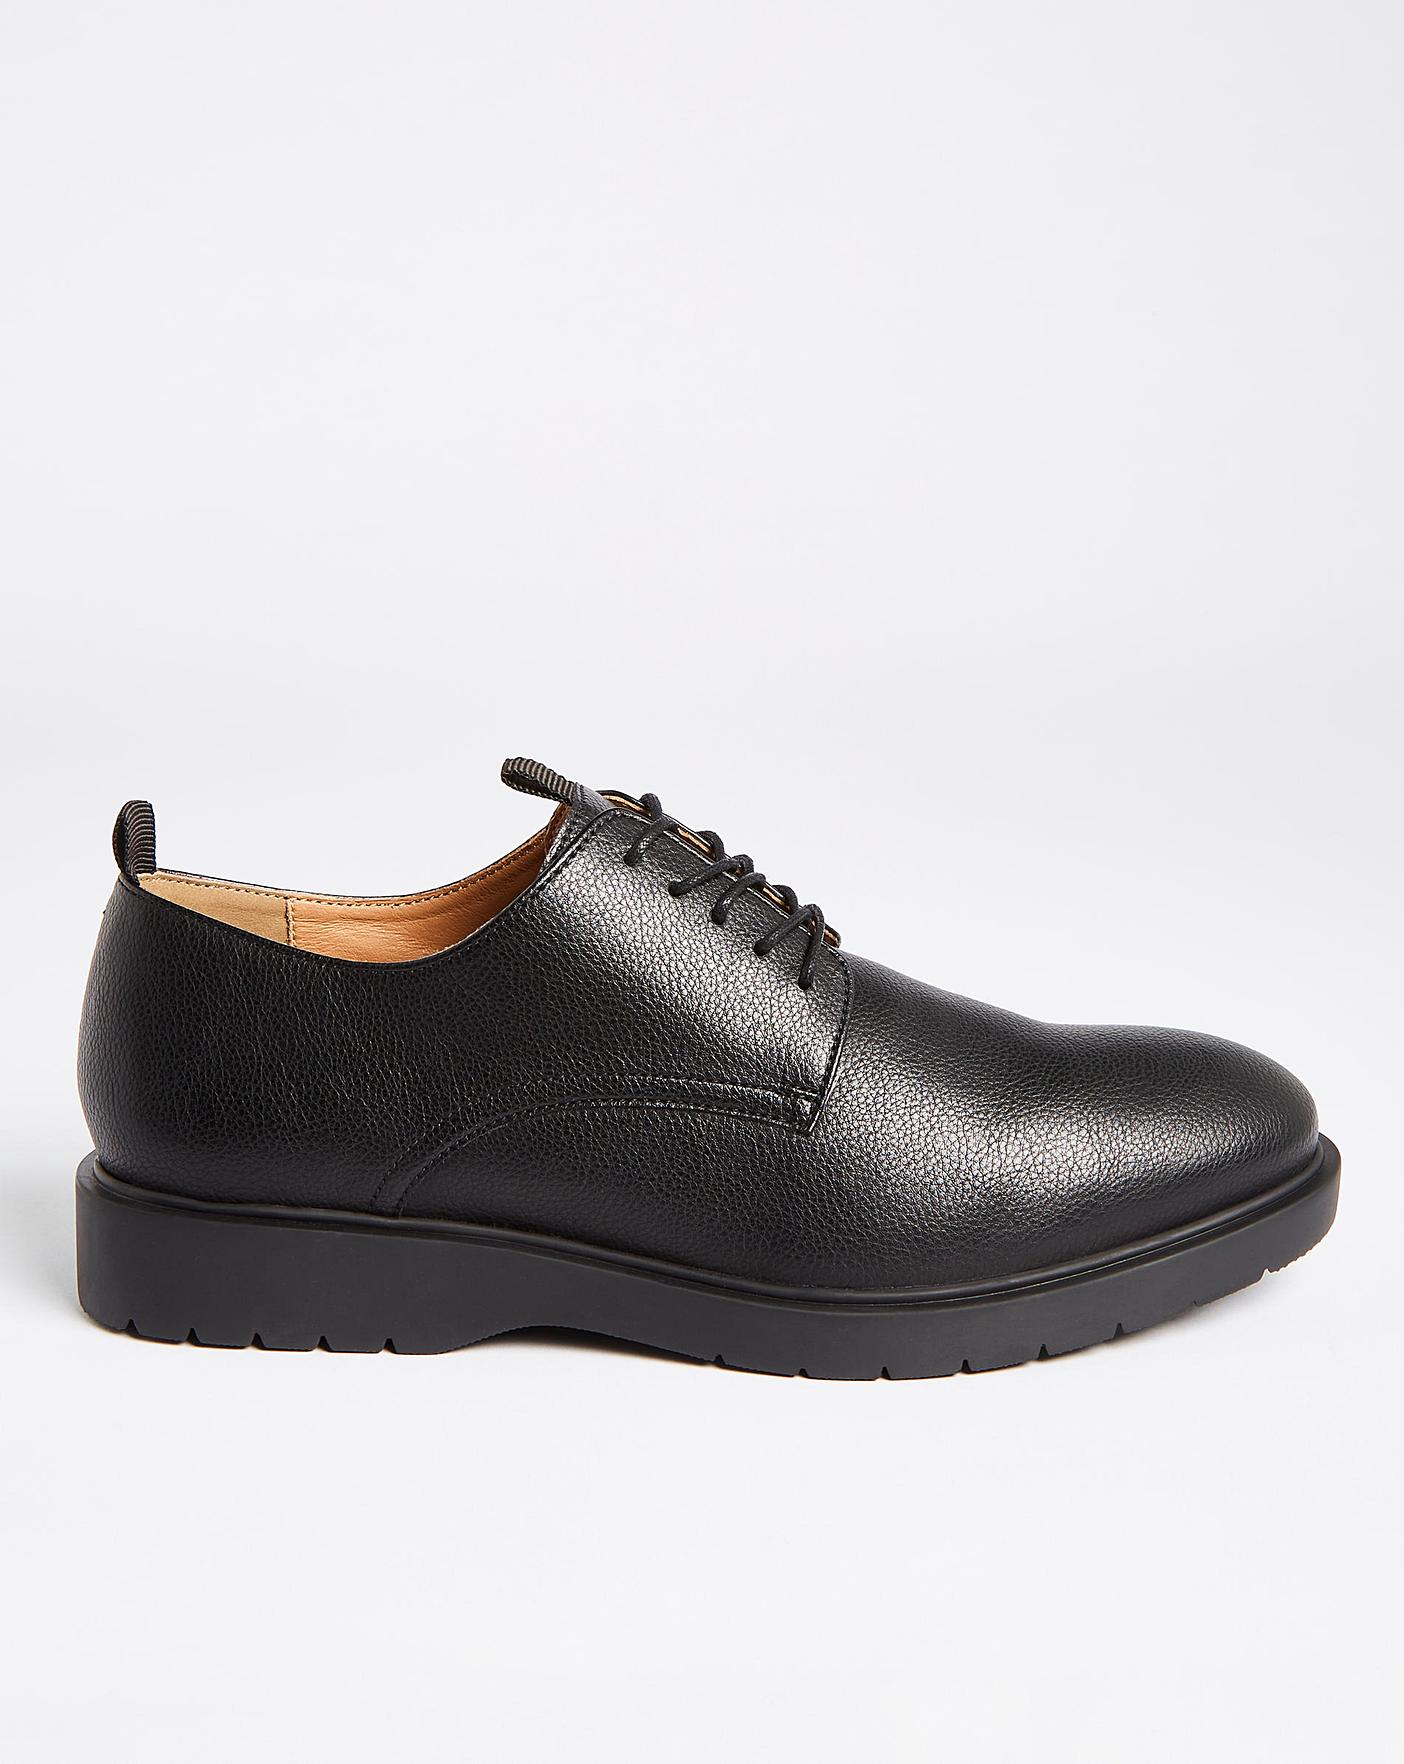 Black Lace Up Leather Look Shoe Wide